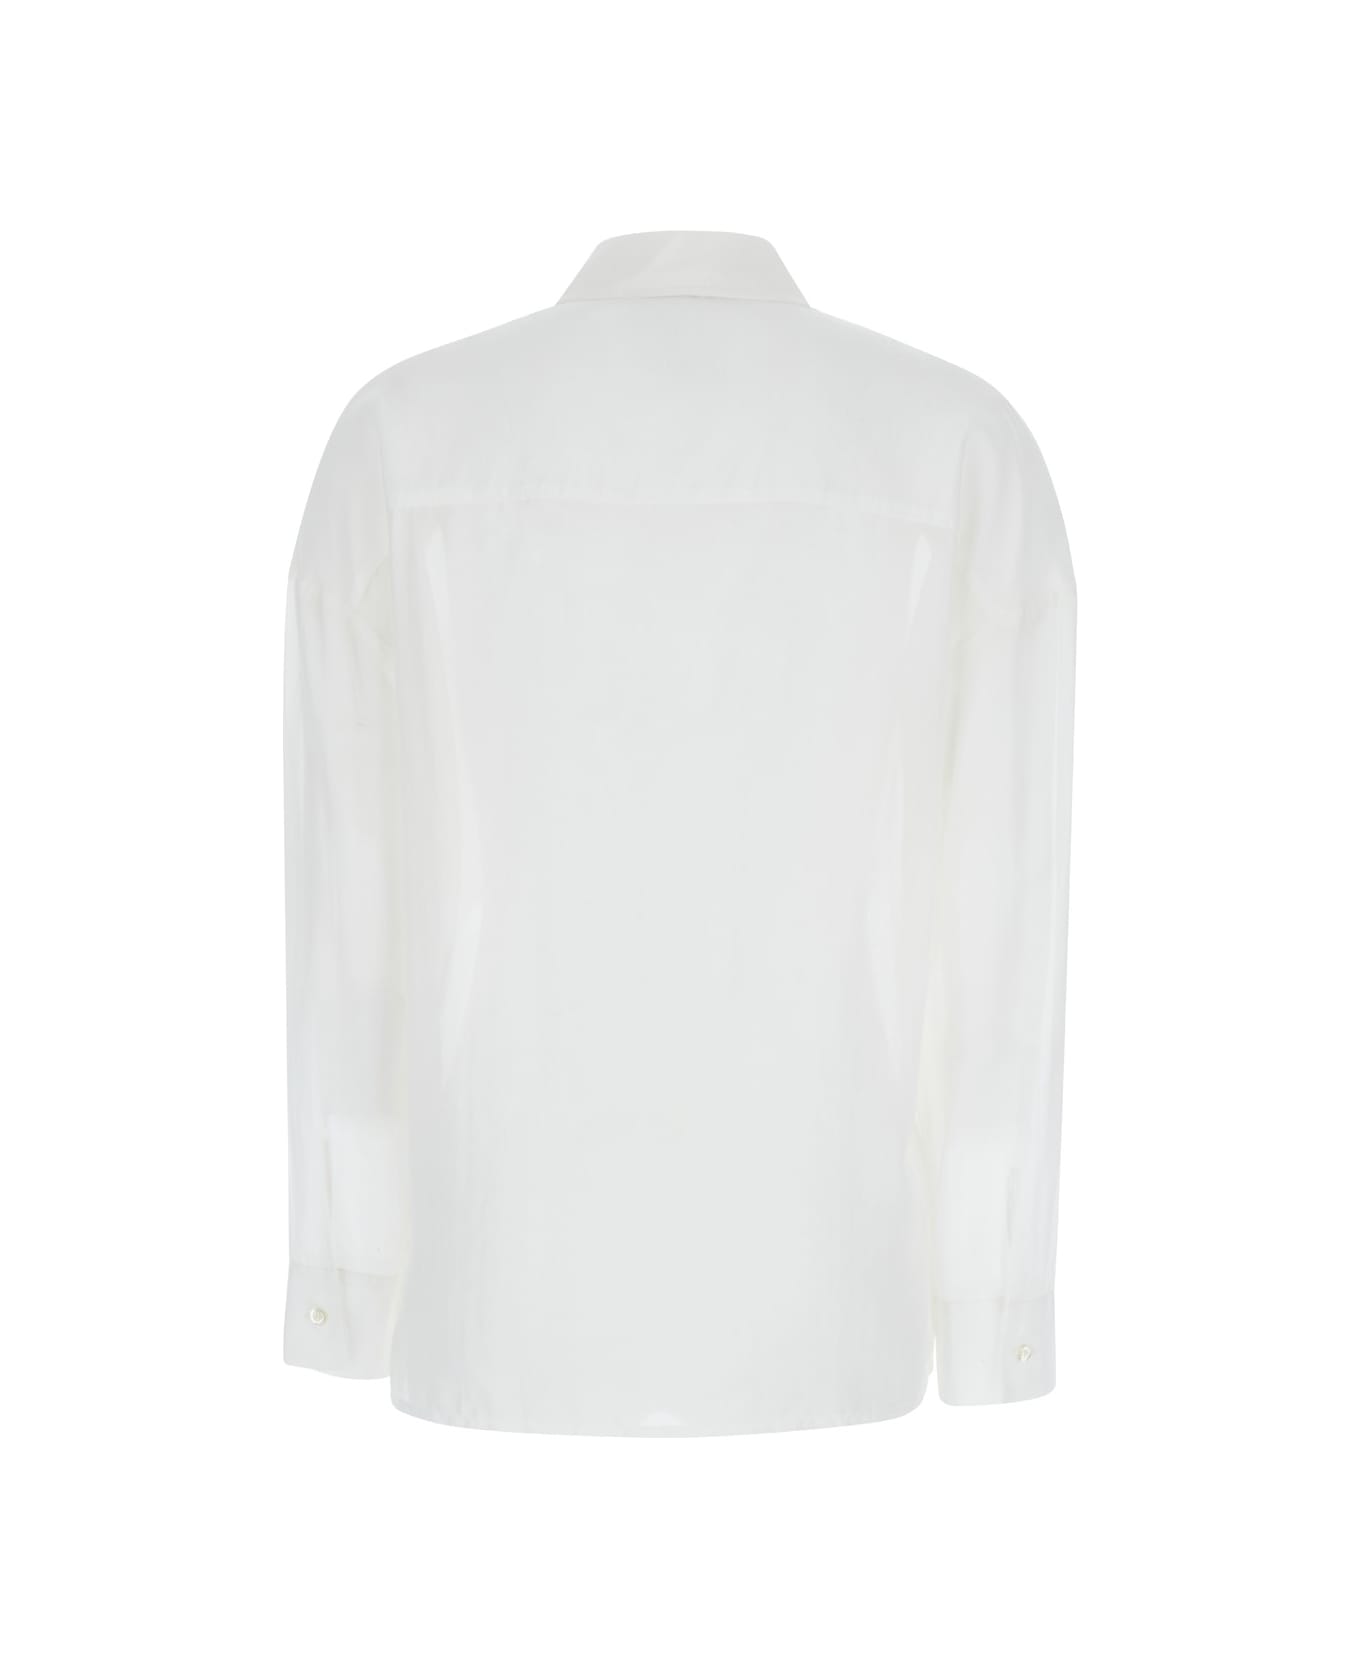 SEMICOUTURE White Classic Shirt In Cotton Blend Woman - White シャツ